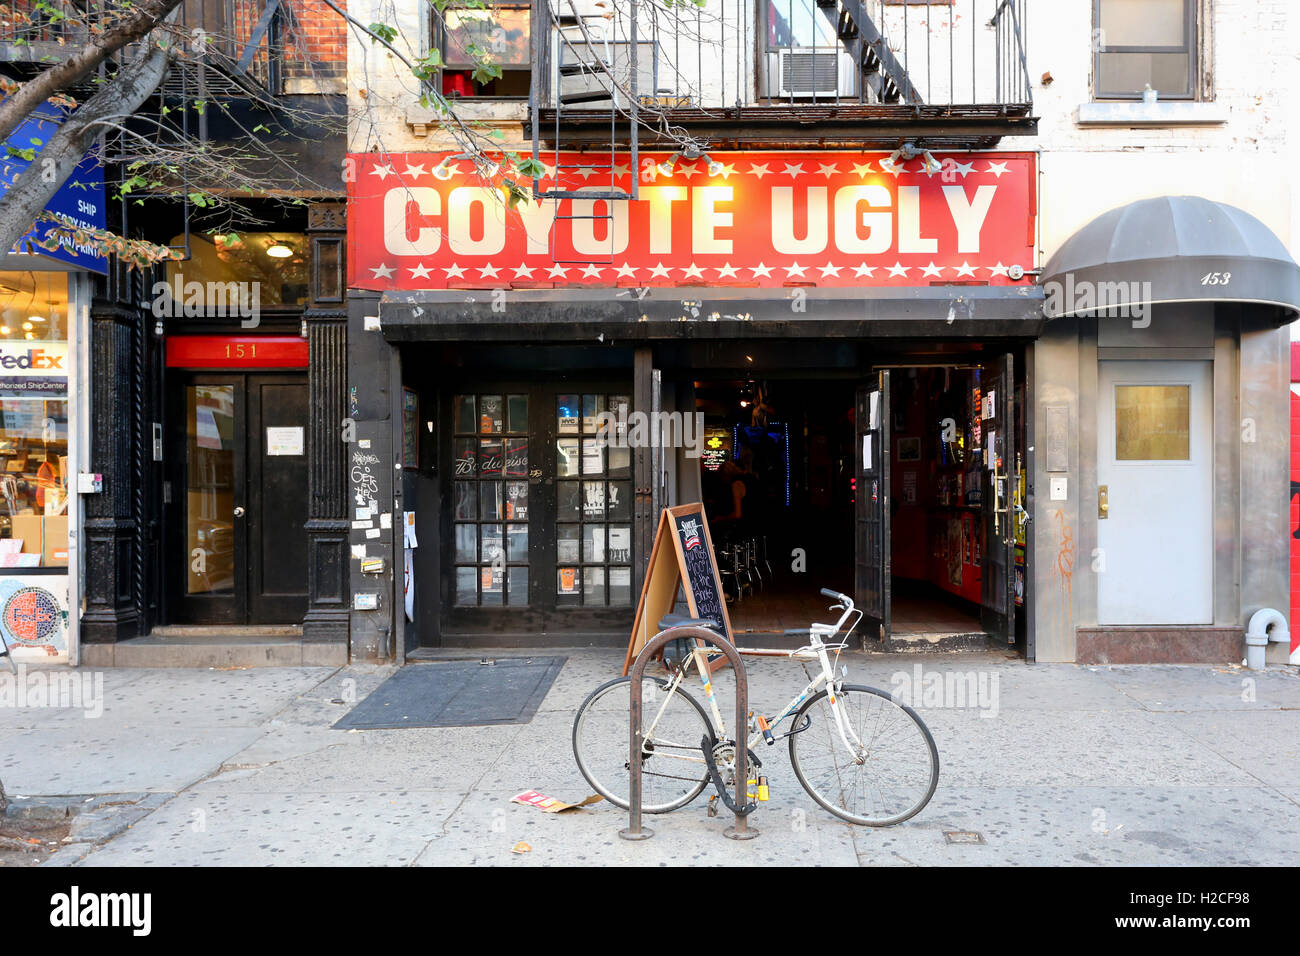 [Storefront storico] Coyote Ugly NYC, 153 First Ave, New York, New York. Di fronte a un bar nel quartiere East Village di Manhattan. Foto Stock